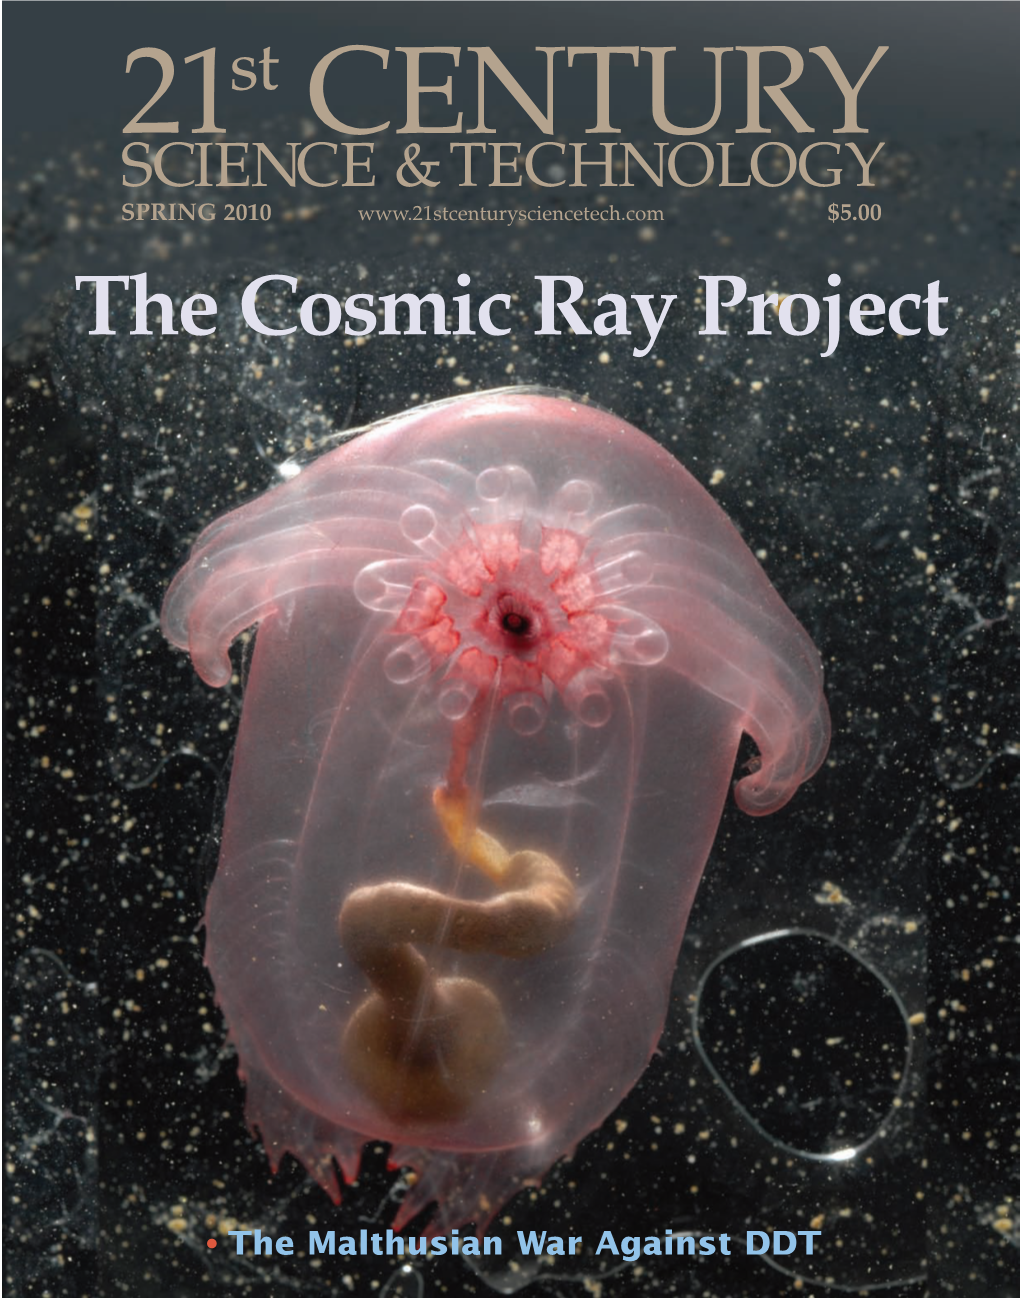 The Cosmic Ray Project